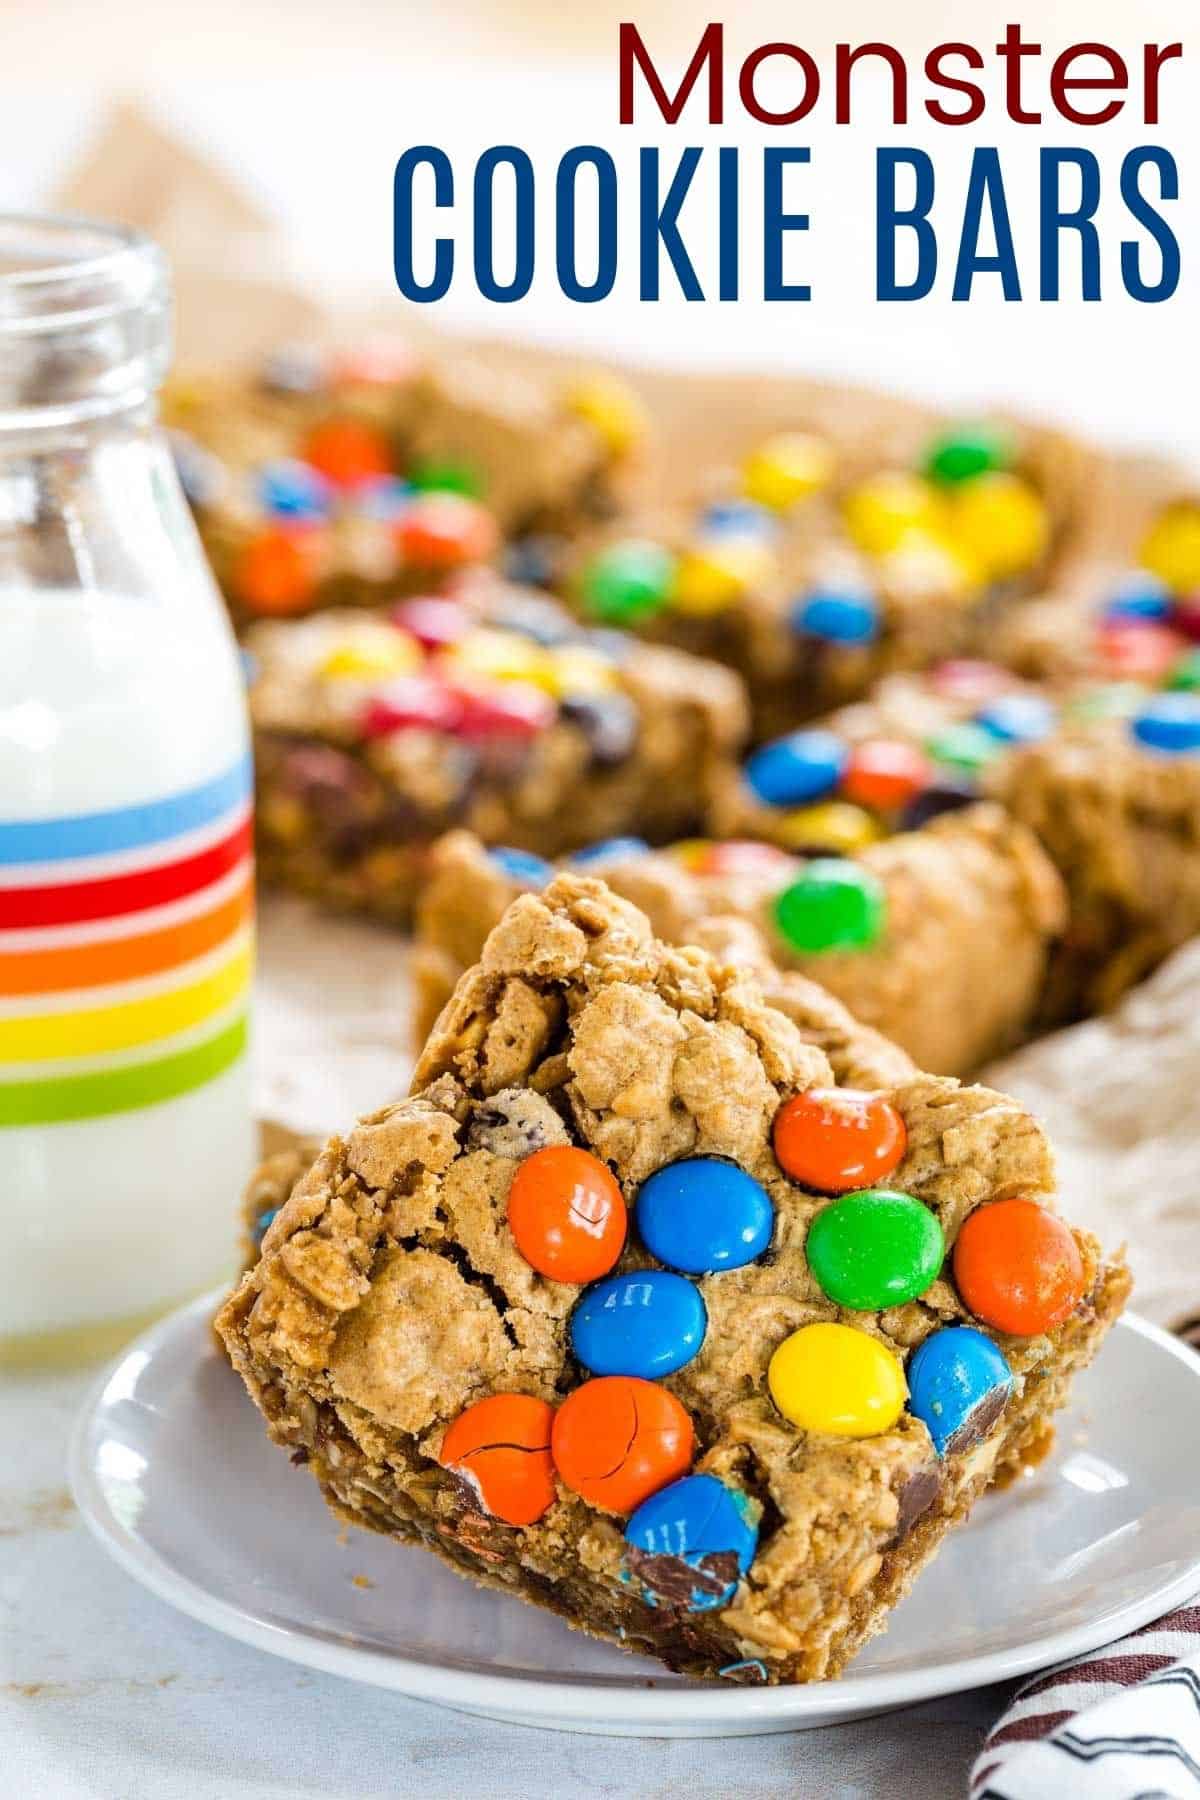 One Bowl Monster Cookie Bar Recipe image with title